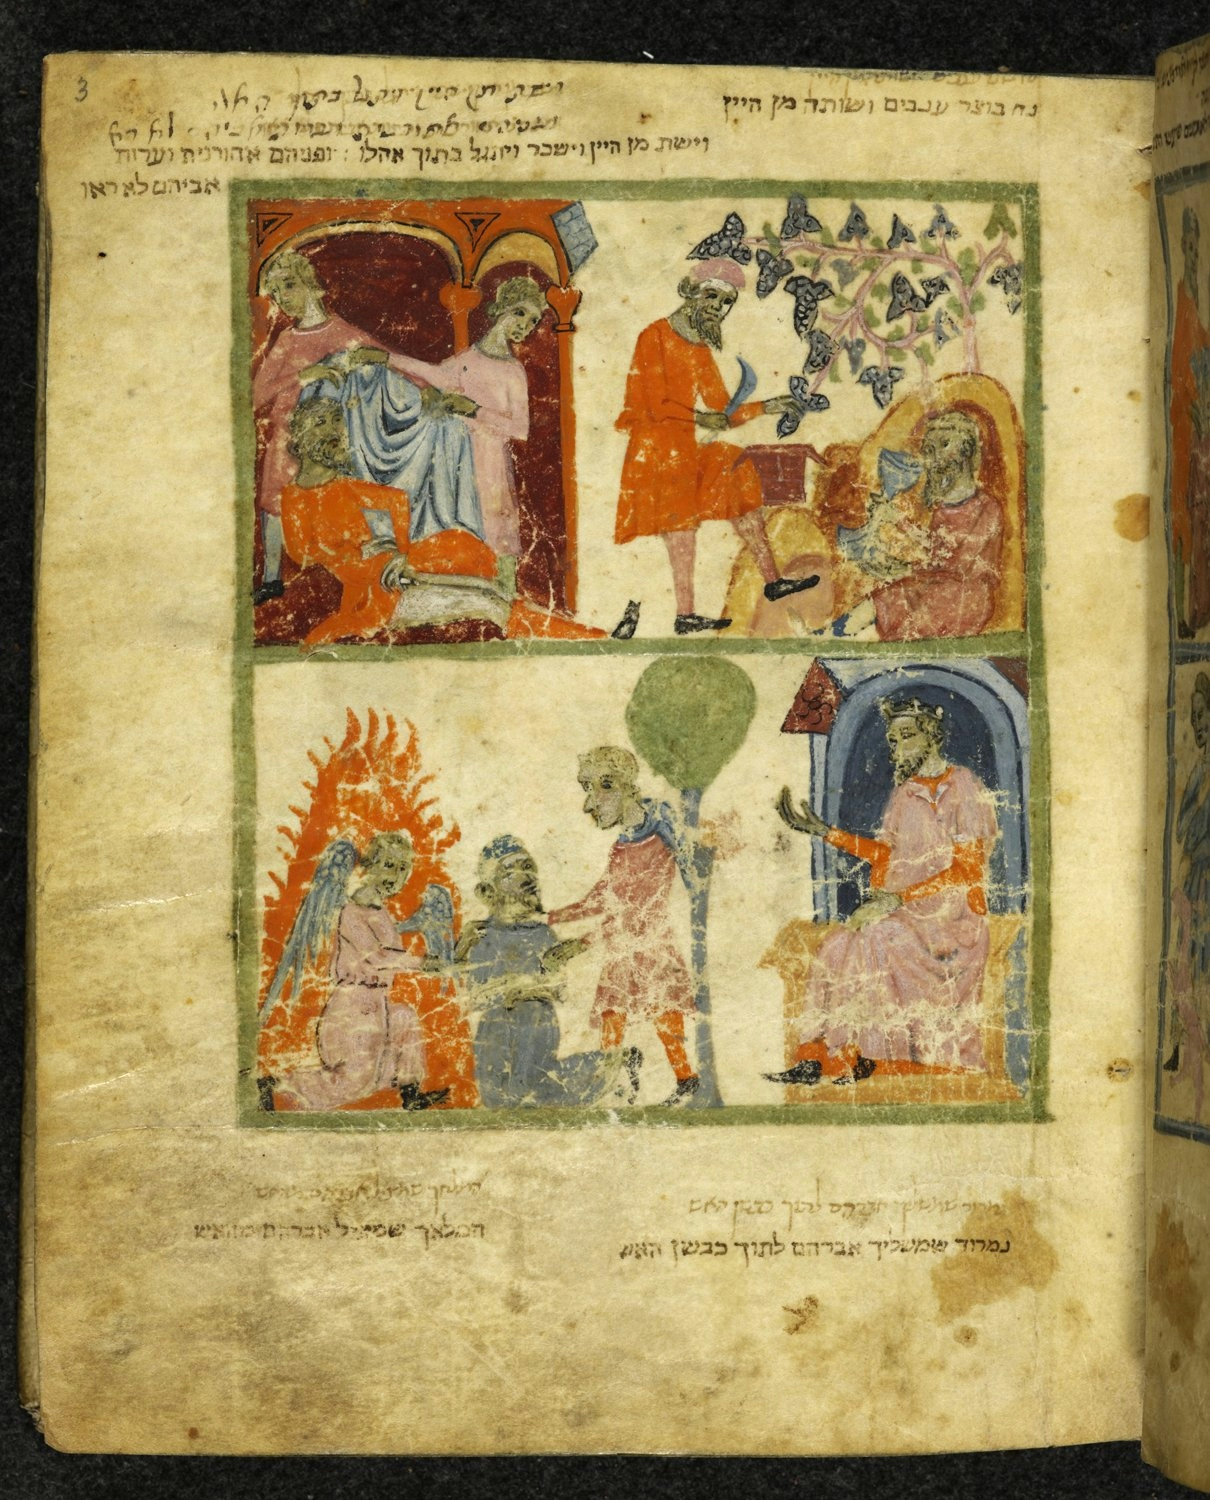 A page of a medieval manuscript with illustrations of scenes from Genesis, showing Noah cultivating vine, becoming drunk and being covered by his sons, and below that an image of Abraham in a fiery furnace. 